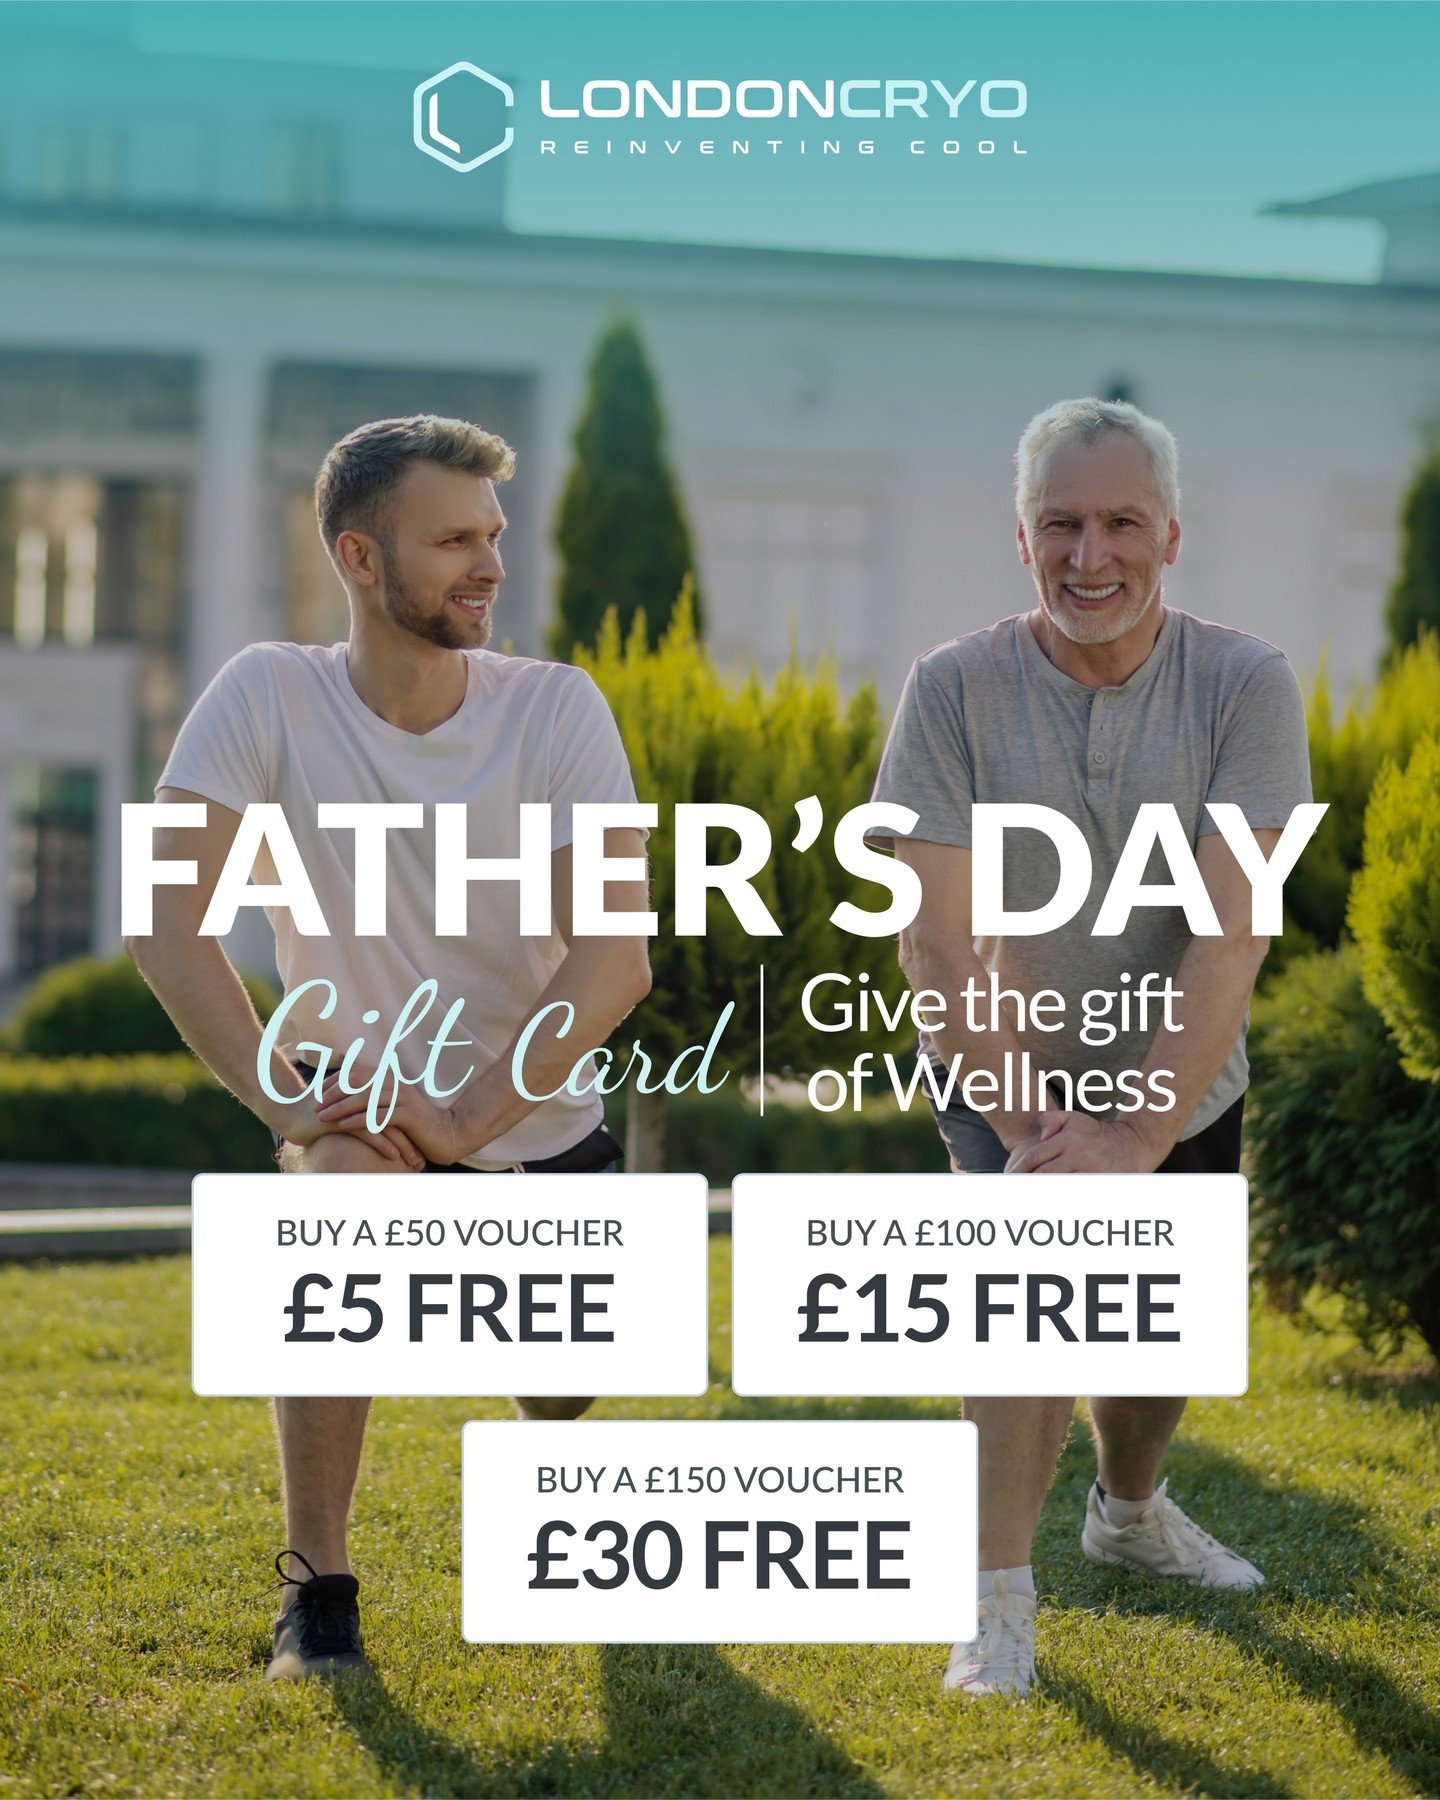 Celebrate your Dad with the ultimate gift of wellness💙⁠
⁠
This Father's Day surprise him with a gift card that promises relaxation rejuvenation, and a well-deserved break from the everyday hustle. Whether it's a soothing massage or a gentleman's fac